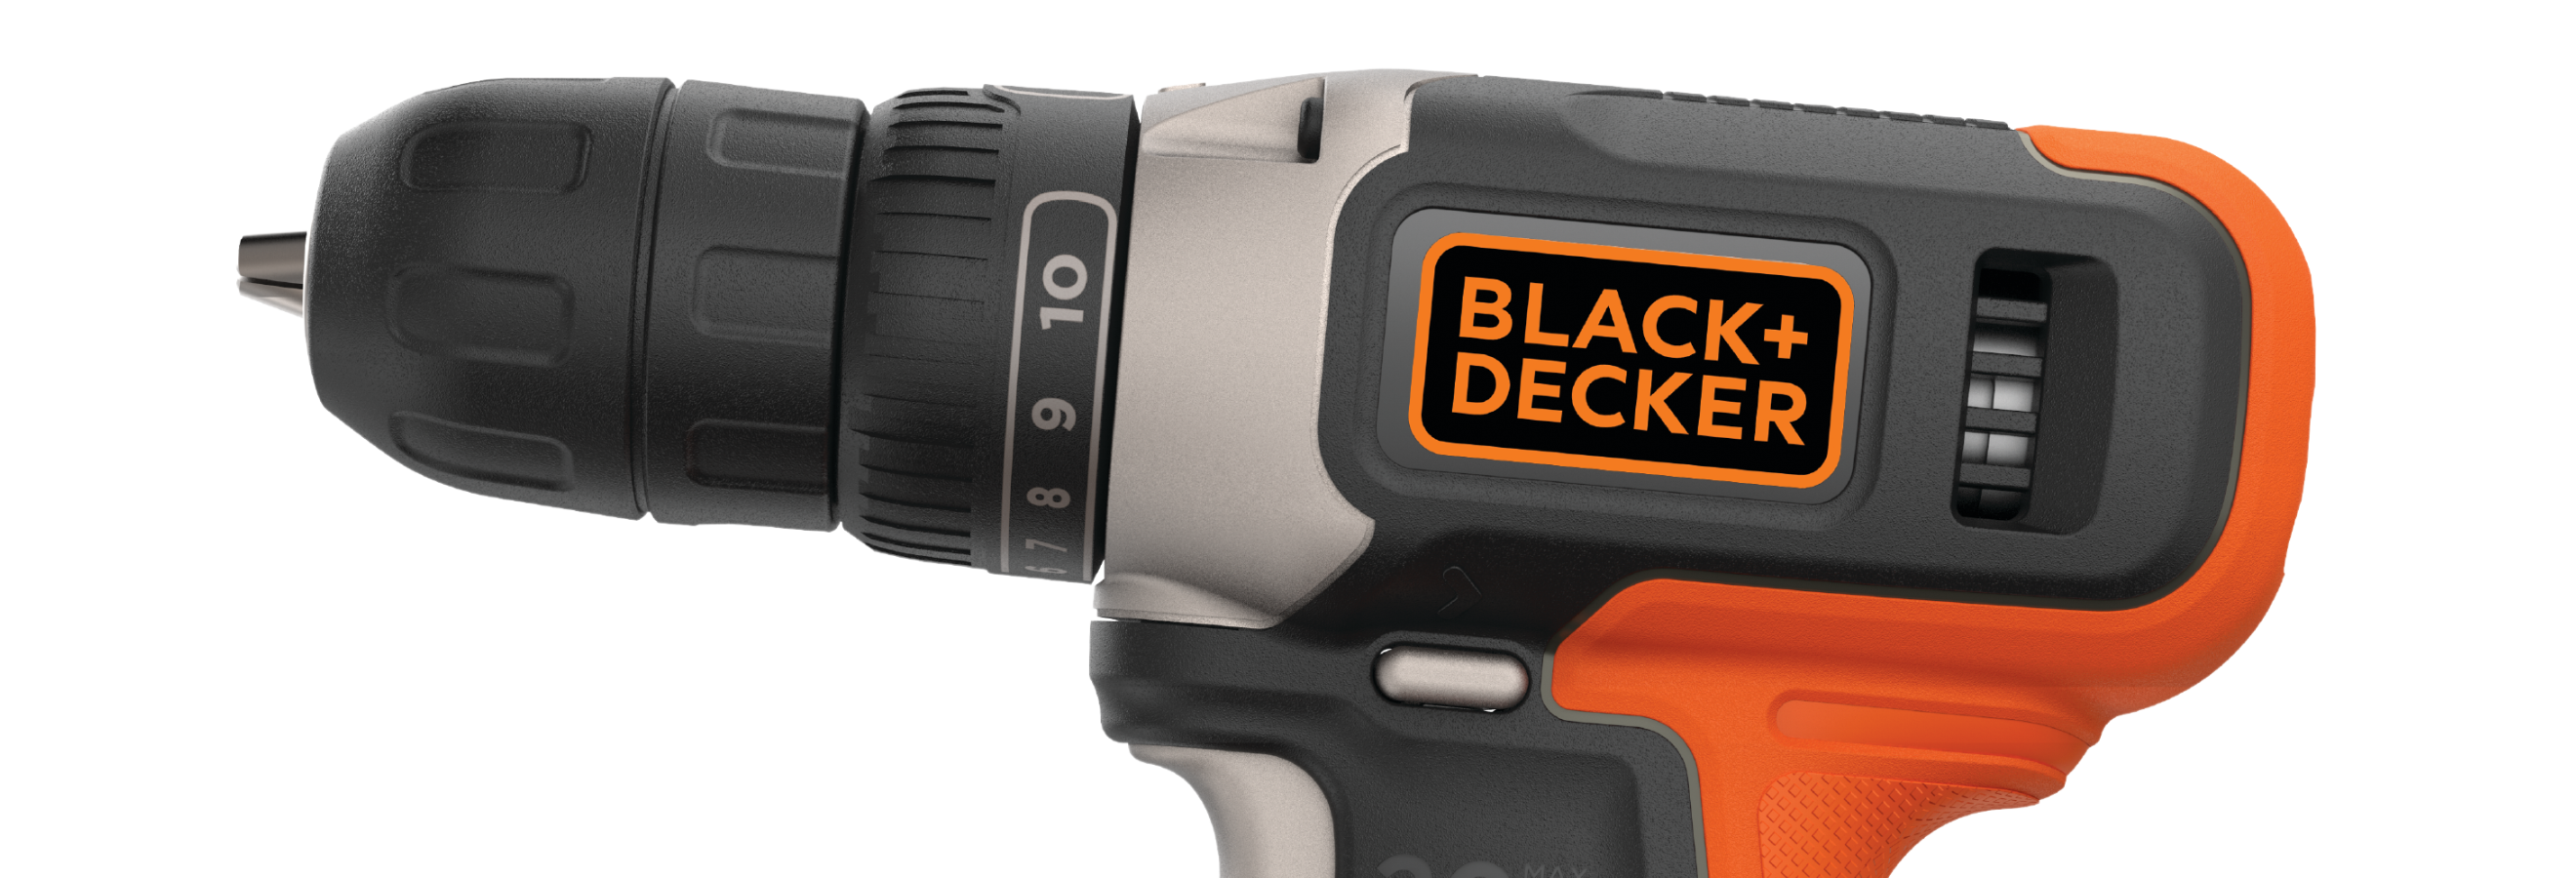 Black & Decker Bcd702c1 20v Max Brushed Lithium-ion 3/8 In. Cordless Drill  Driver Kit (1.5 Ah) : Target